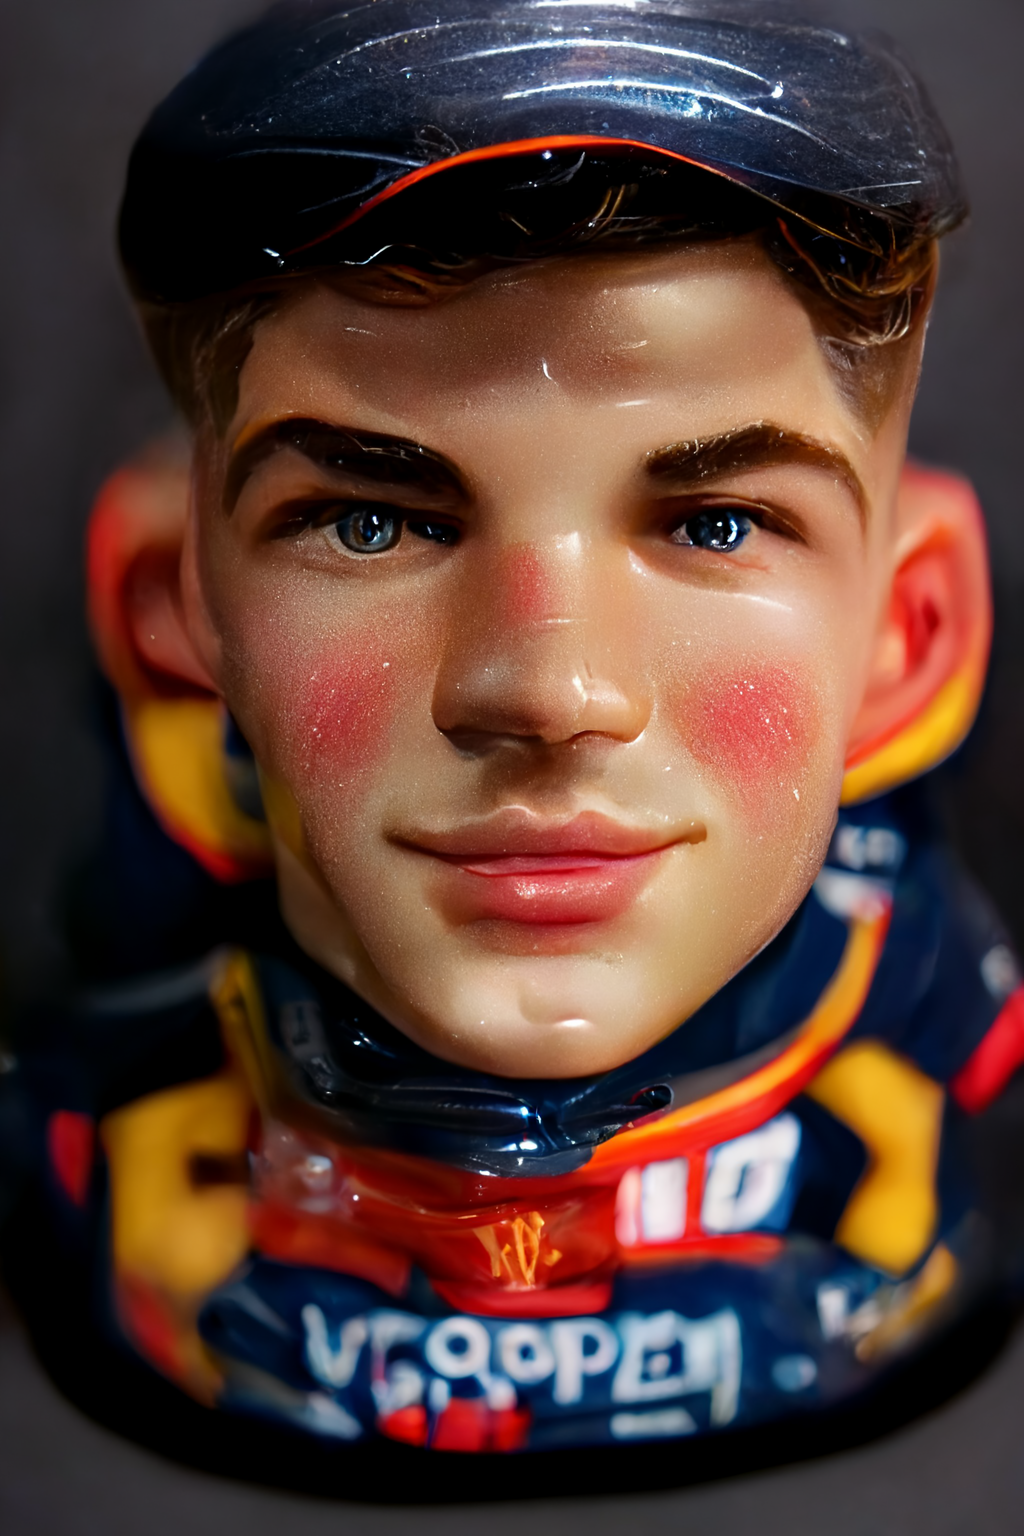 Rixster_max_verstappen_as_a_whobble_doll_smooth_glossy_plastic__ce56ab2d-a57e-4660-a654-d8b0d3018aaa.png